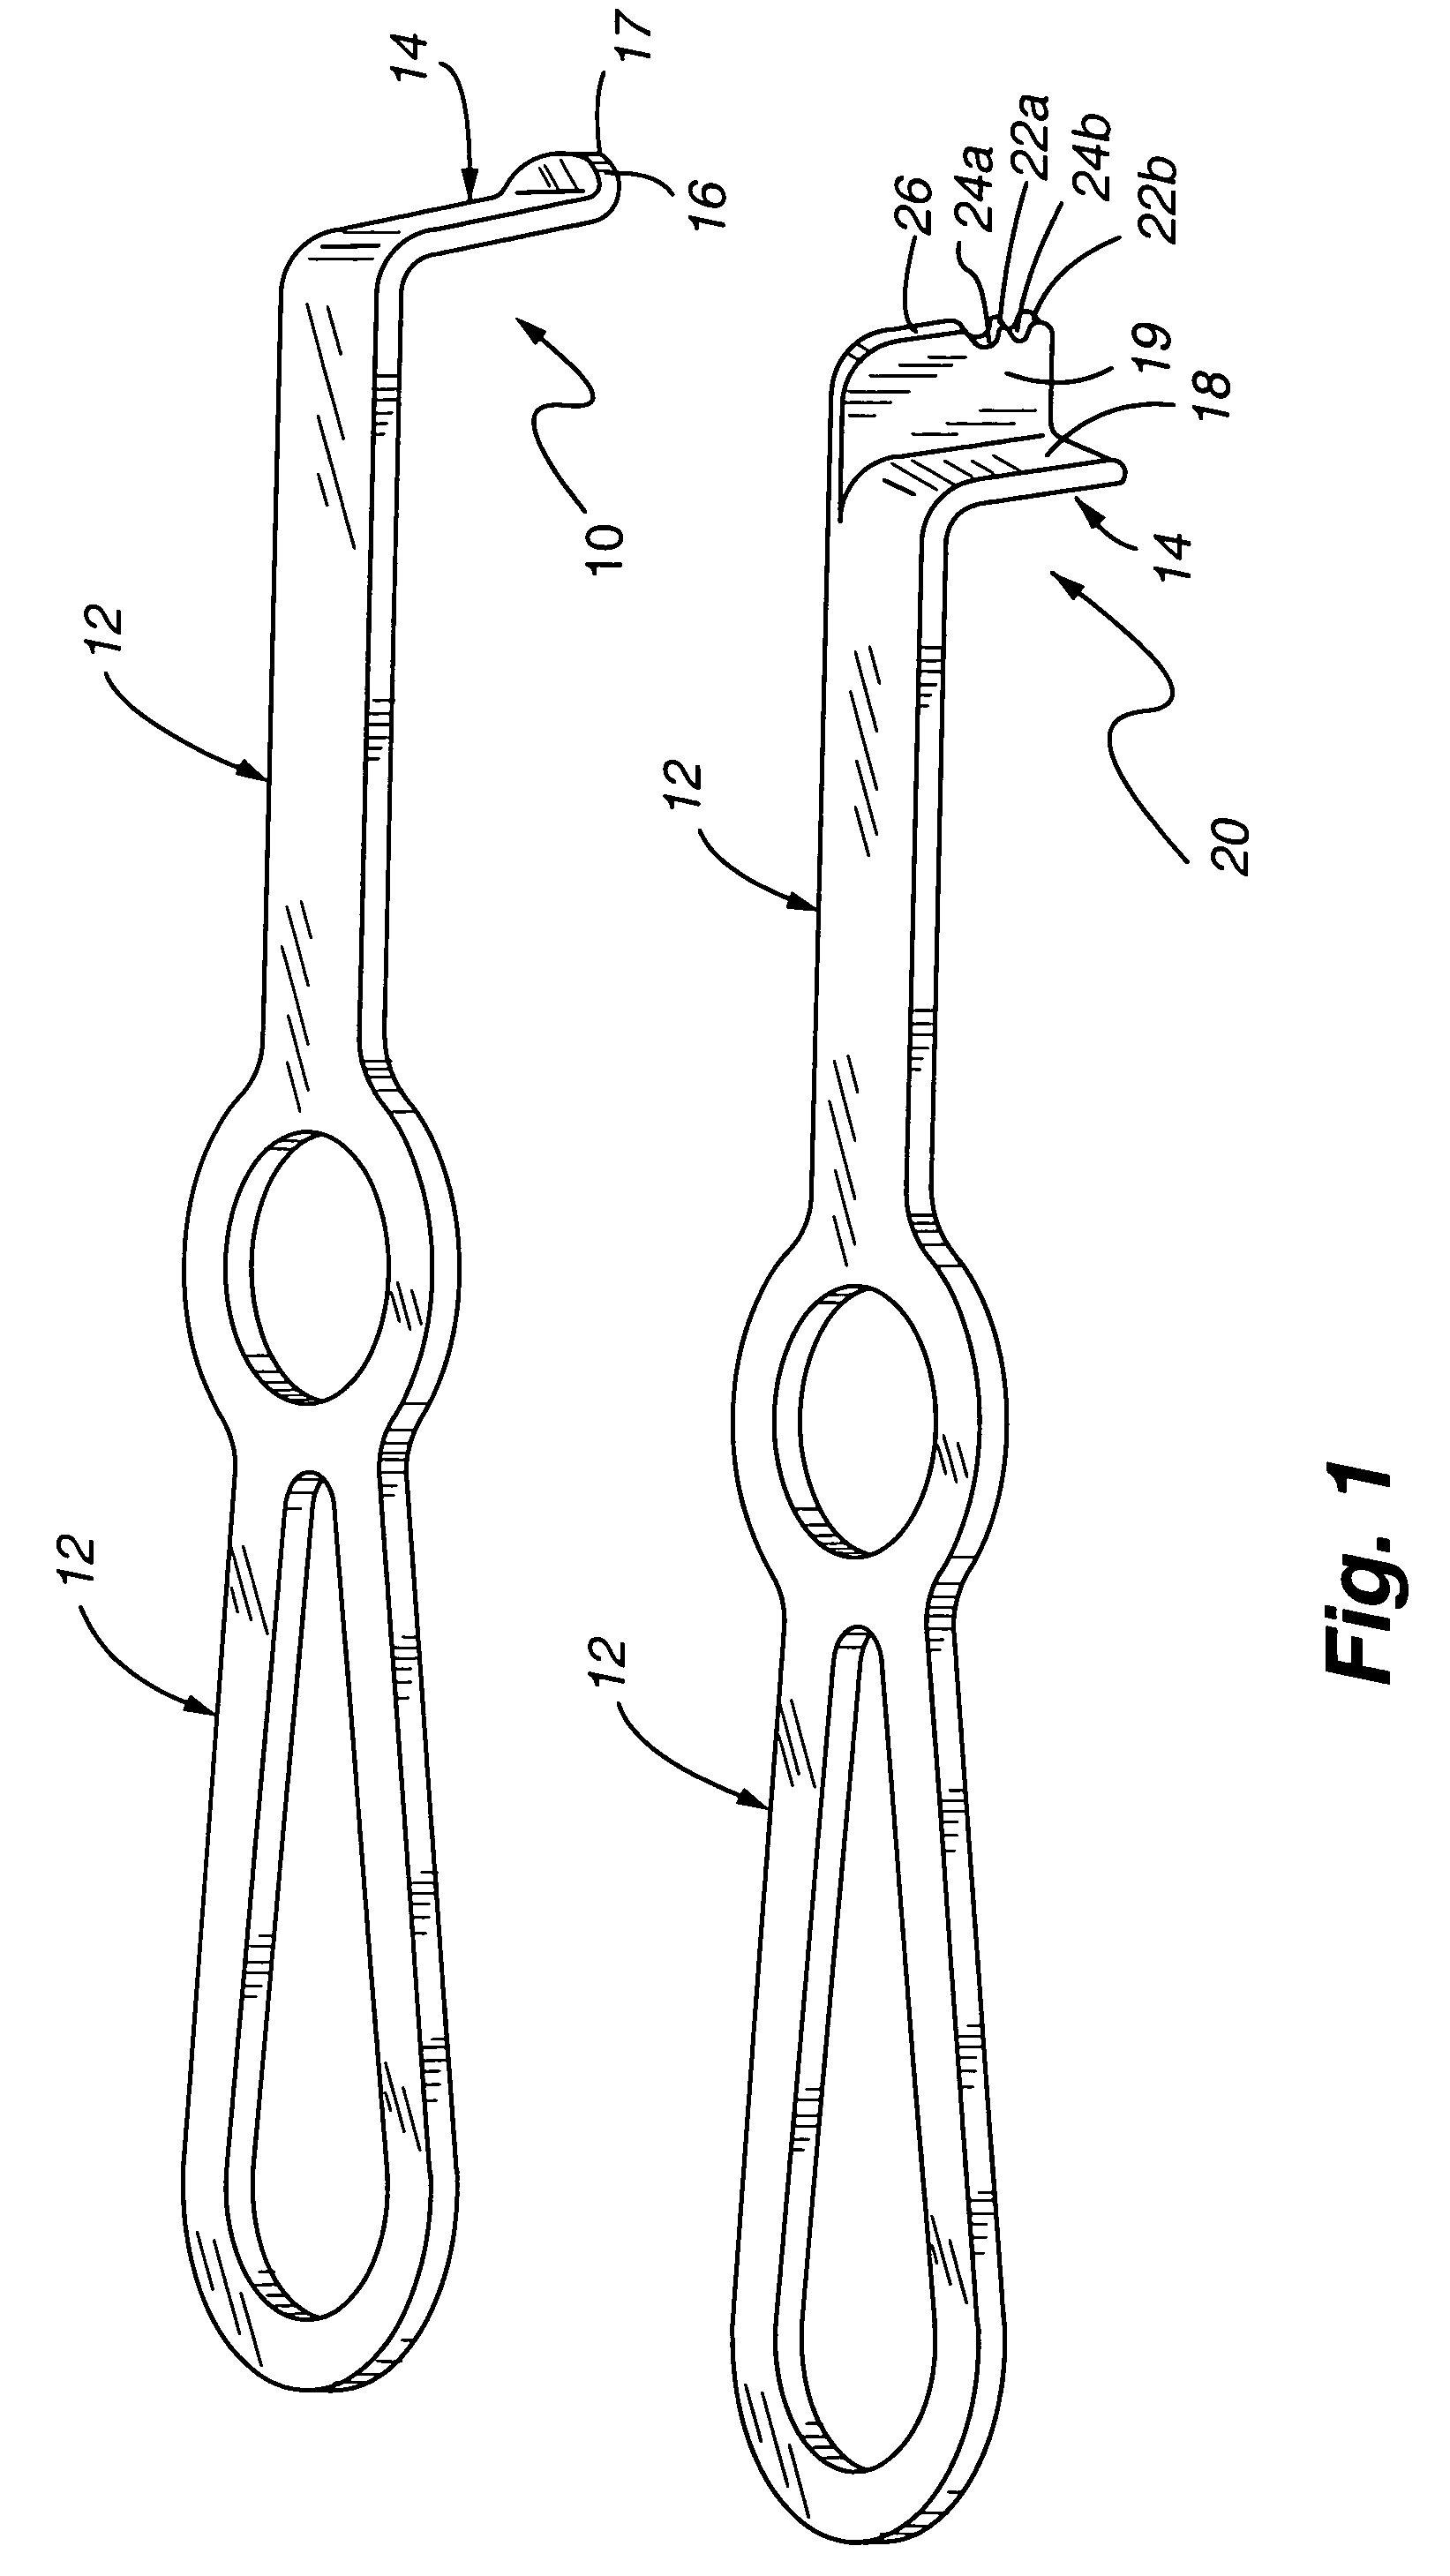 Method and device for retractor for microsurgical intermuscular lumbar arthrodesis